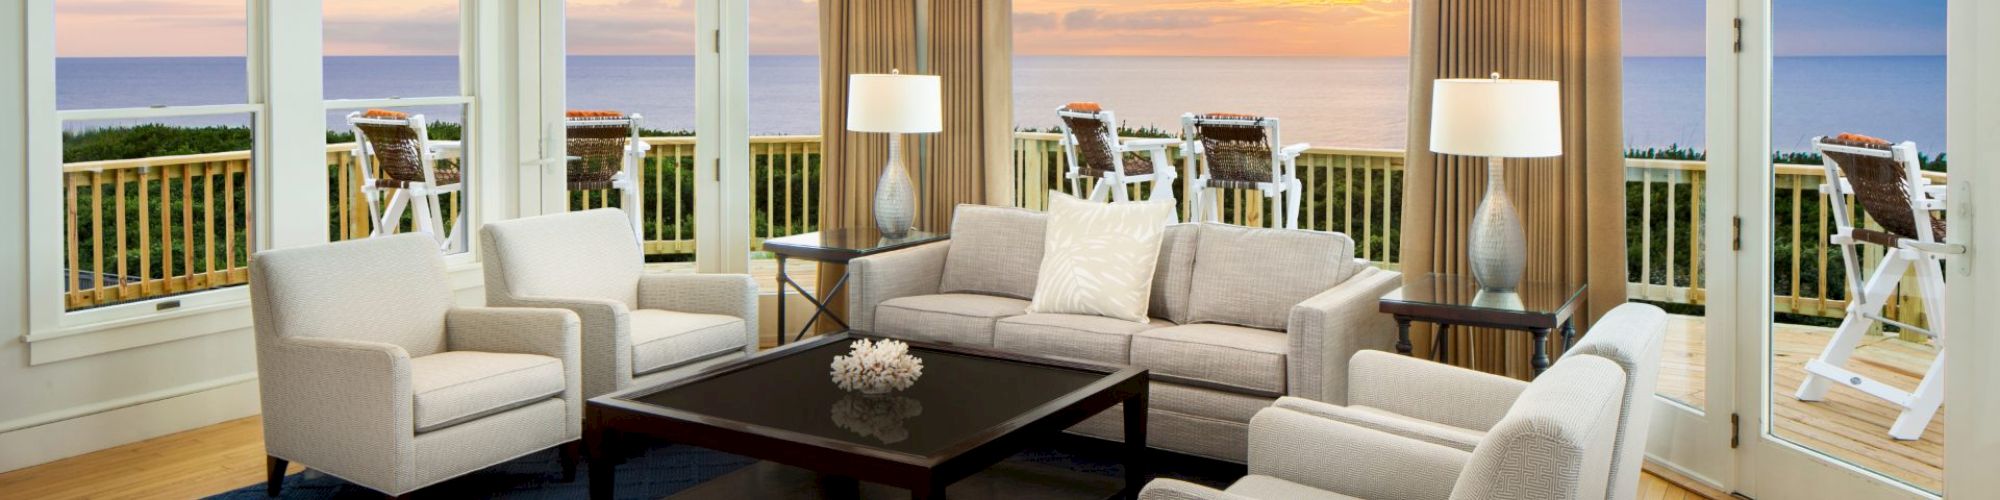 A cozy living room with beige sofas, a dark coffee table on a blue rug, and large windows offering an ocean view at sunset, complete with a balcony.